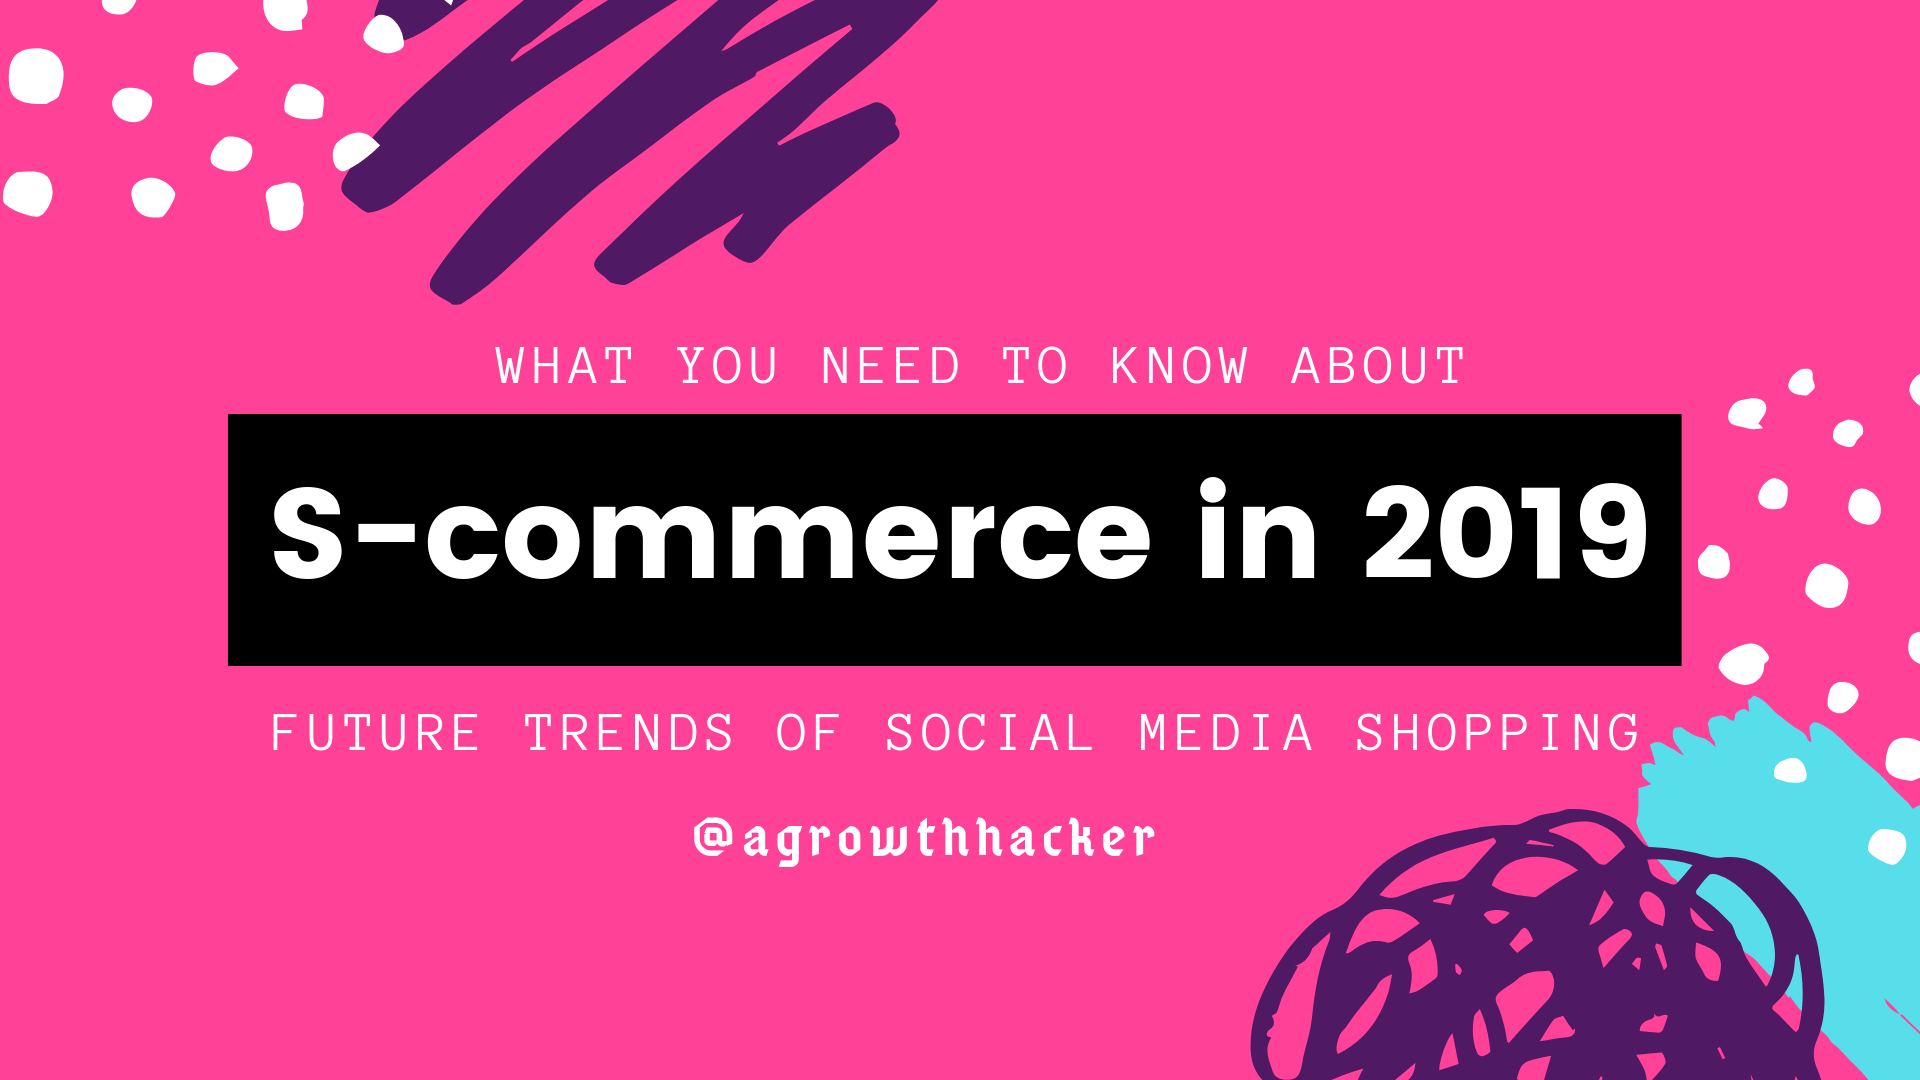 What you need to know about S-commerce in 2019